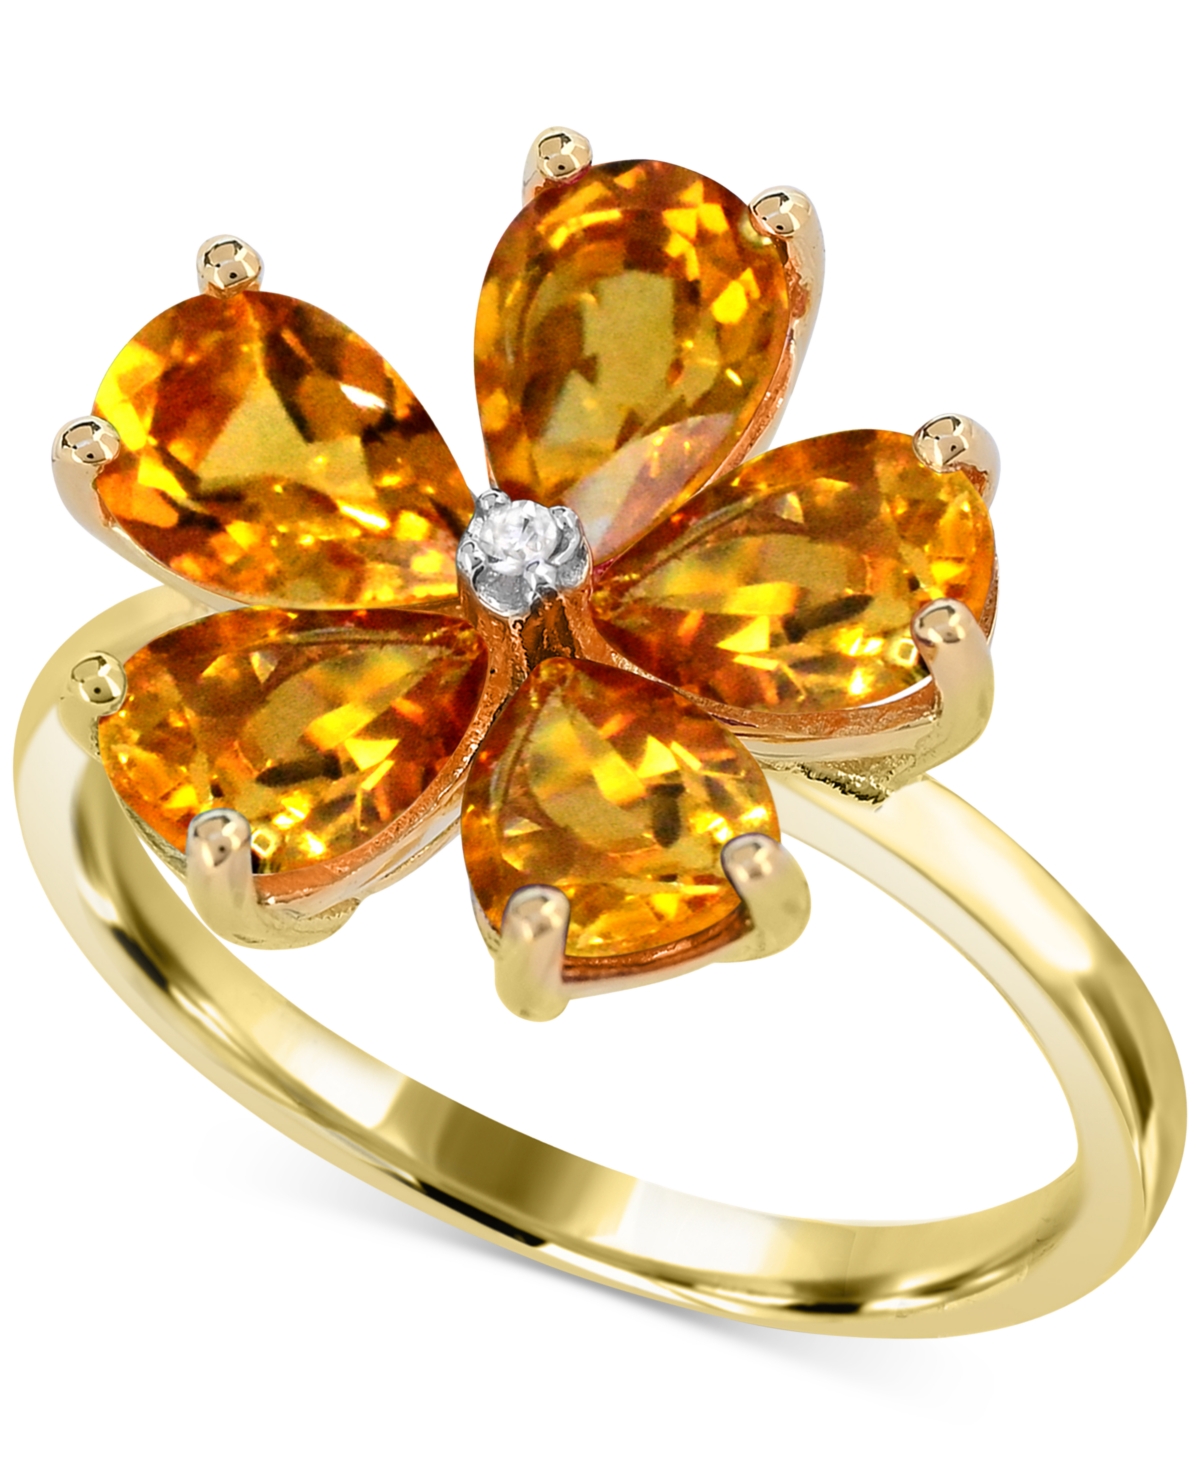 Citrine (3-1/4 ct. t.w.) & Diamond Accent Flower Ring in 14k Gold-Plated Sterling Silver - Citrine